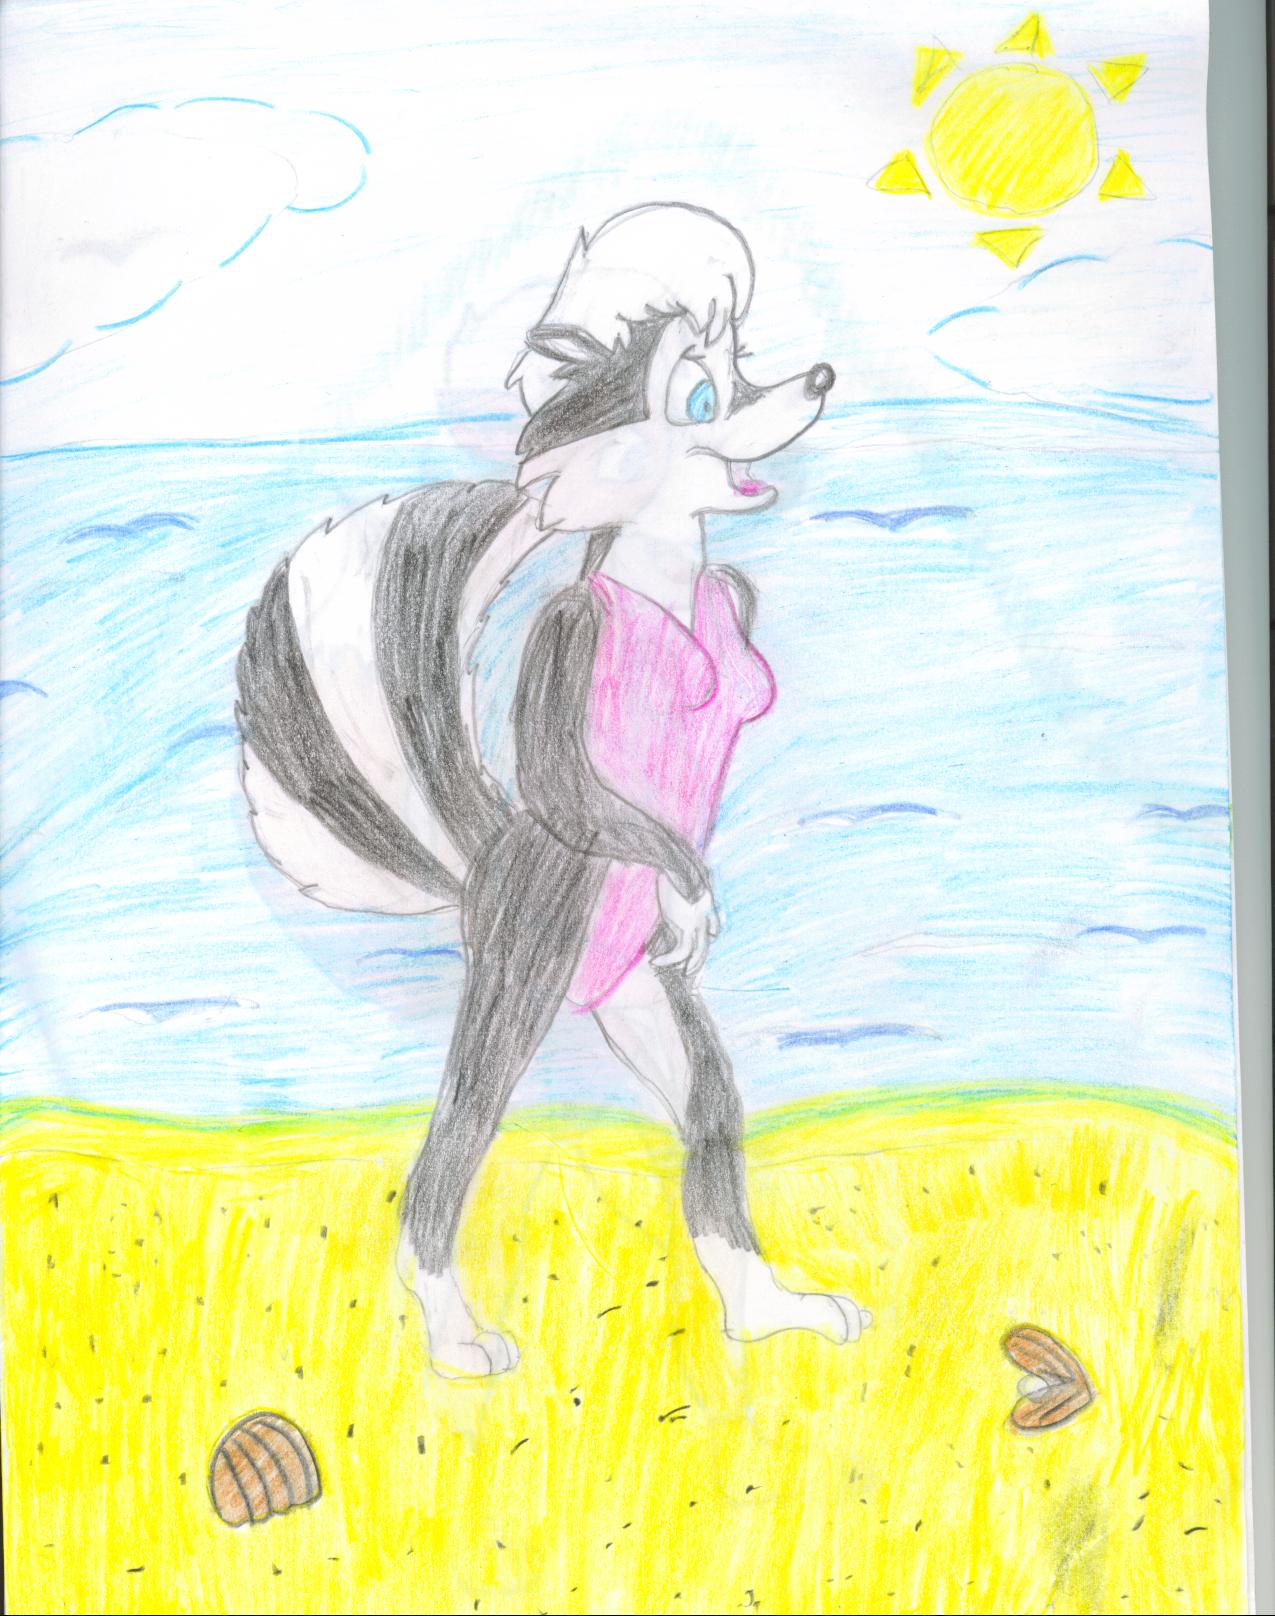 Kelly The Skunk In The Sun by unicorn13564